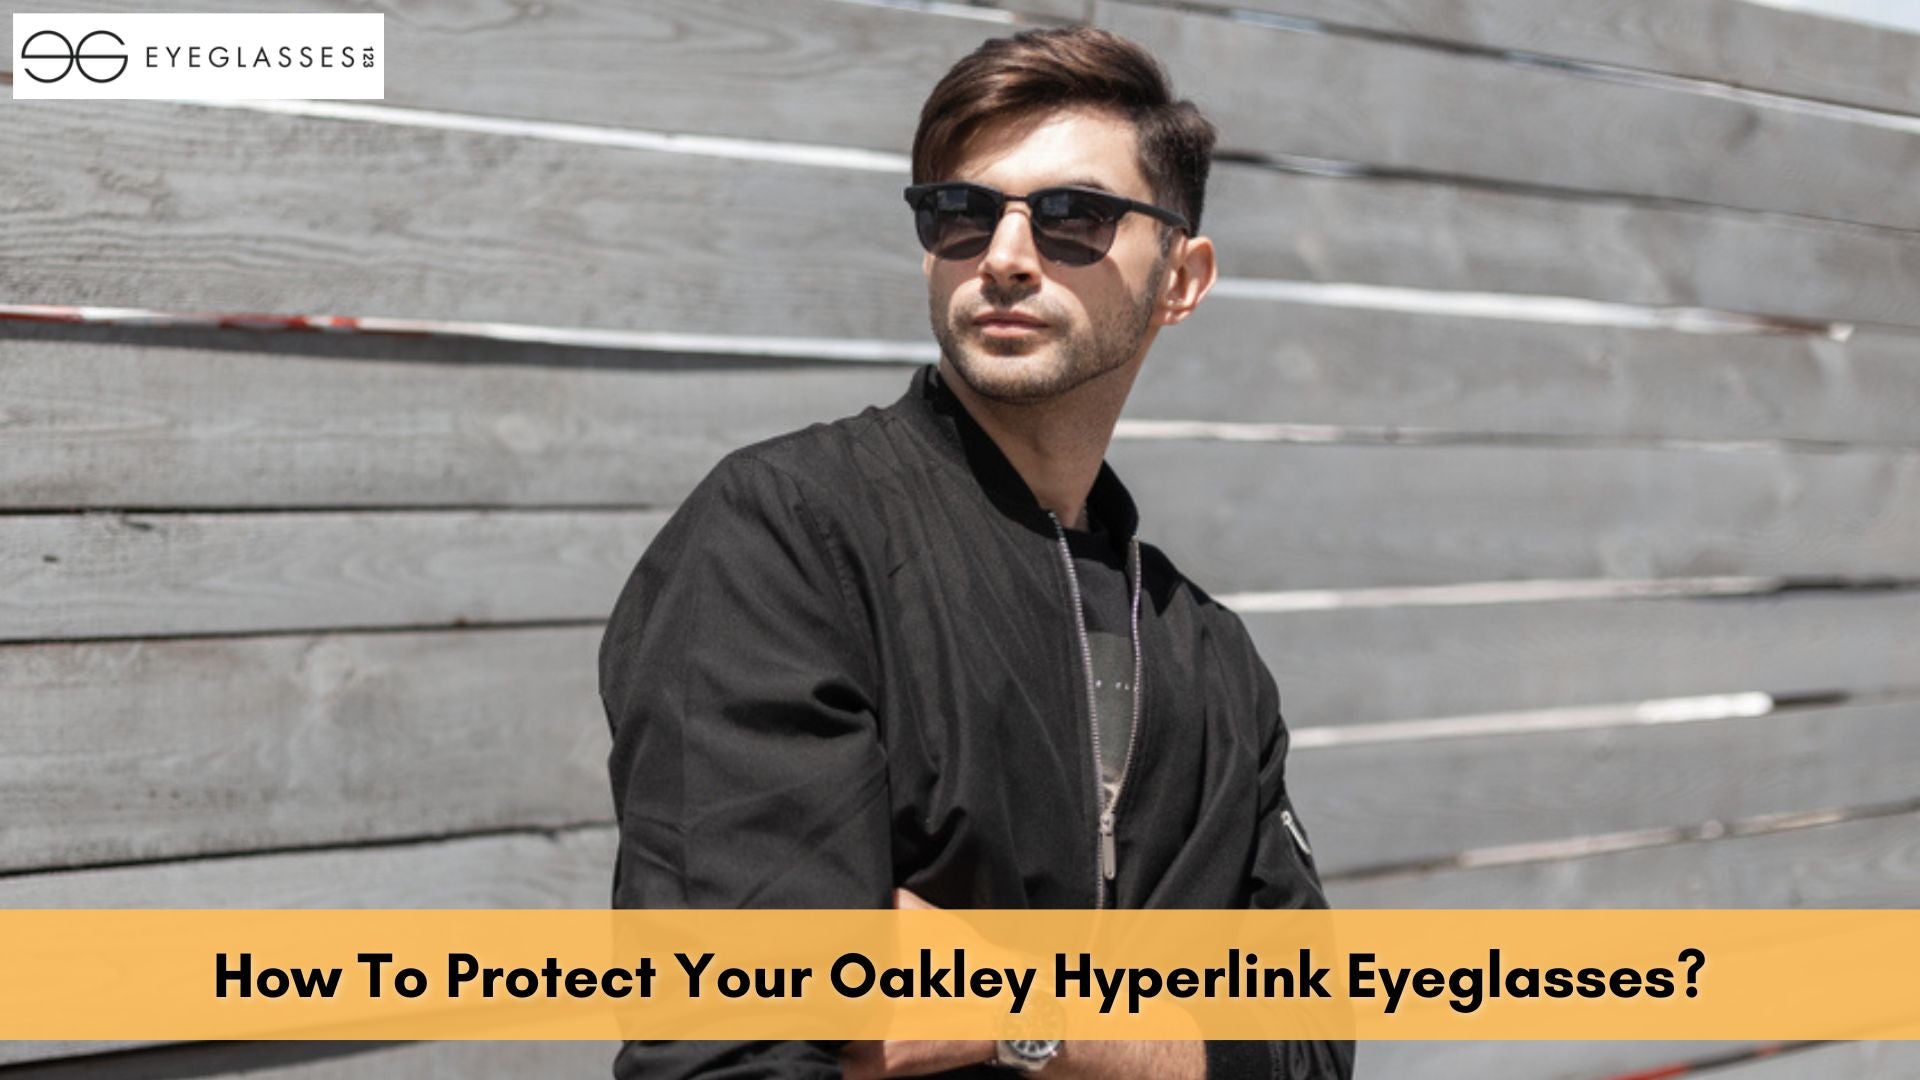 How To Protect Your Oakley Hyperlink Eyeglasses?